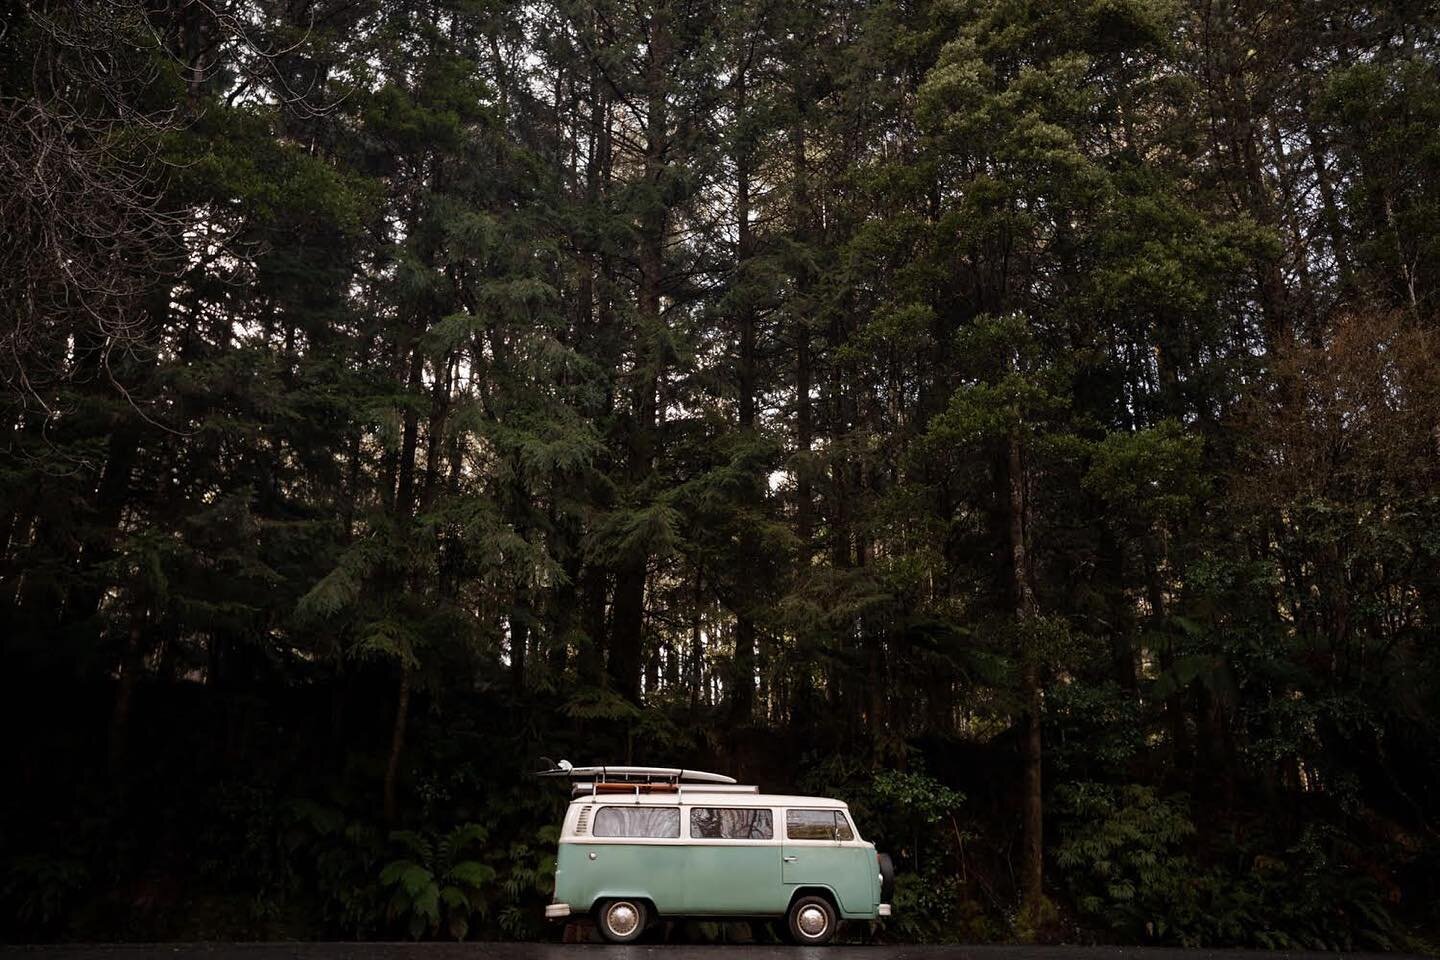 In between lockdowns last year I was lucky enough to borrow my mate's Kombi van and head into the Otways for a few nights. I love this part of Victoria so much. The dense forest, the winter light through the trees. Just being there makes me feel so c